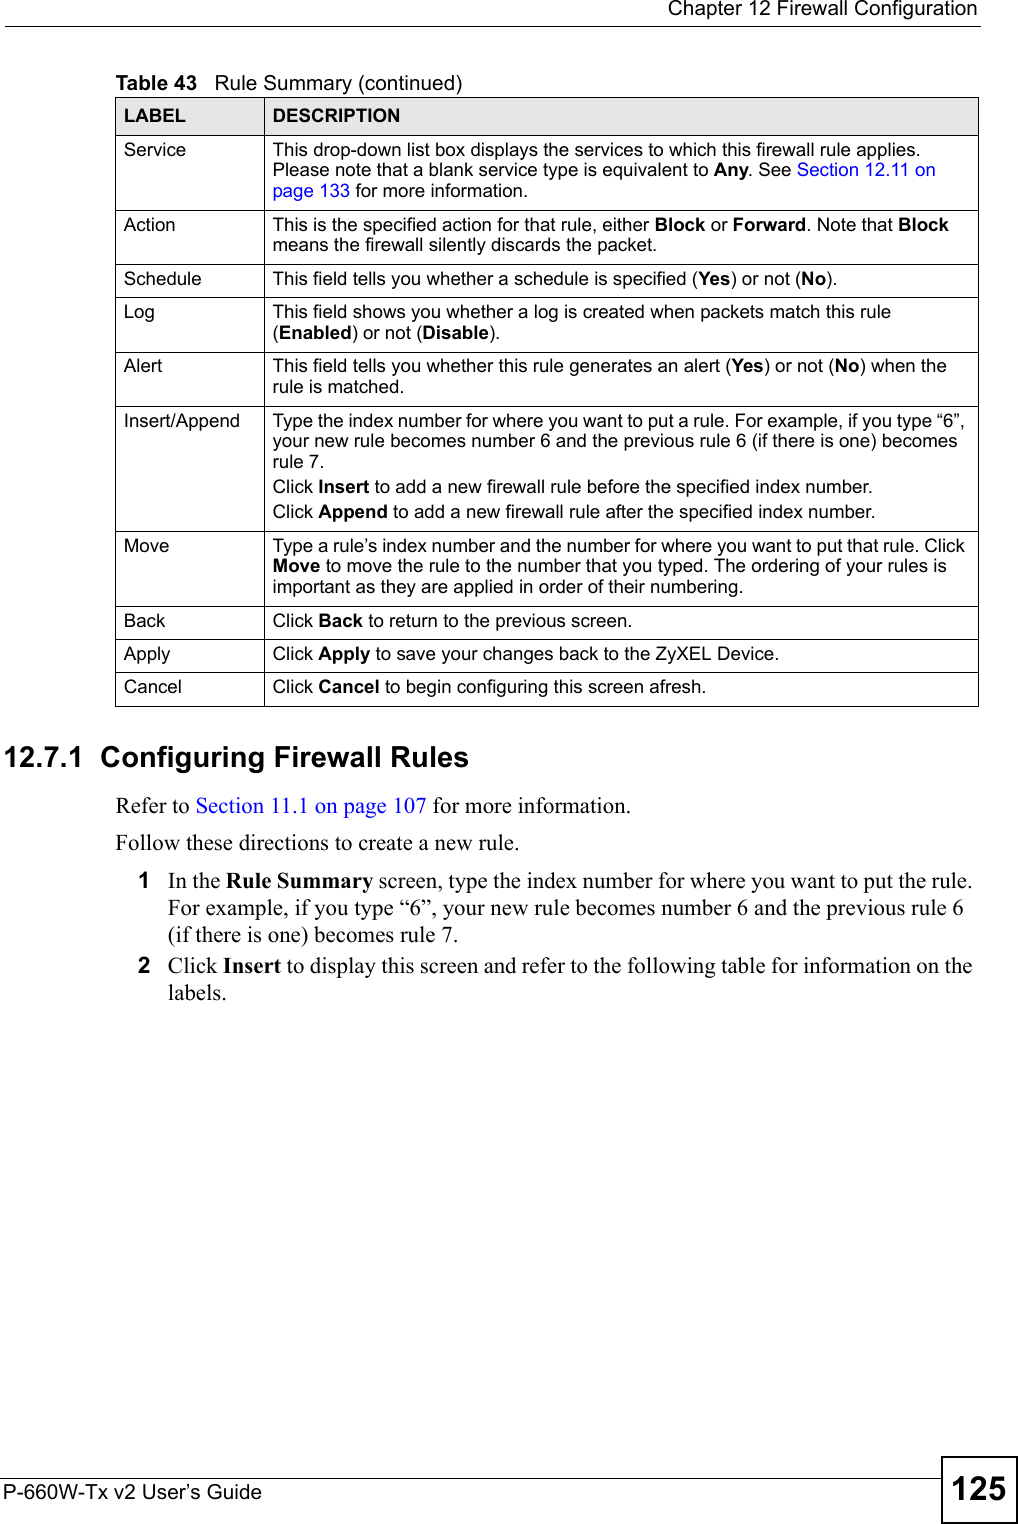  Chapter 12 Firewall ConfigurationP-660W-Tx v2 User’s Guide 12512.7.1  Configuring Firewall Rules   Refer to Section 11.1 on page 107 for more information. Follow these directions to create a new rule.1In the Rule Summary screen, type the index number for where you want to put the rule. For example, if you type “6”, your new rule becomes number 6 and the previous rule 6 (if there is one) becomes rule 7. 2Click Insert to display this screen and refer to the following table for information on the labels.Service  This drop-down list box displays the services to which this firewall rule applies. Please note that a blank service type is equivalent to Any. See Section 12.11 on page 133 for more information.Action This is the specified action for that rule, either Block or Forward. Note that Block means the firewall silently discards the packet.Schedule This field tells you whether a schedule is specified (Yes) or not (No).Log This field shows you whether a log is created when packets match this rule (Enabled) or not (Disable).Alert This field tells you whether this rule generates an alert (Yes) or not (No) when the rule is matched.Insert/Append Type the index number for where you want to put a rule. For example, if you type “6”, your new rule becomes number 6 and the previous rule 6 (if there is one) becomes rule 7. Click Insert to add a new firewall rule before the specified index number. Click Append to add a new firewall rule after the specified index number. Move Type a rule’s index number and the number for where you want to put that rule. Click Move to move the rule to the number that you typed. The ordering of your rules is important as they are applied in order of their numbering.Back Click Back to return to the previous screen. Apply Click Apply to save your changes back to the ZyXEL Device.Cancel Click Cancel to begin configuring this screen afresh.Table 43   Rule Summary (continued)LABEL DESCRIPTION